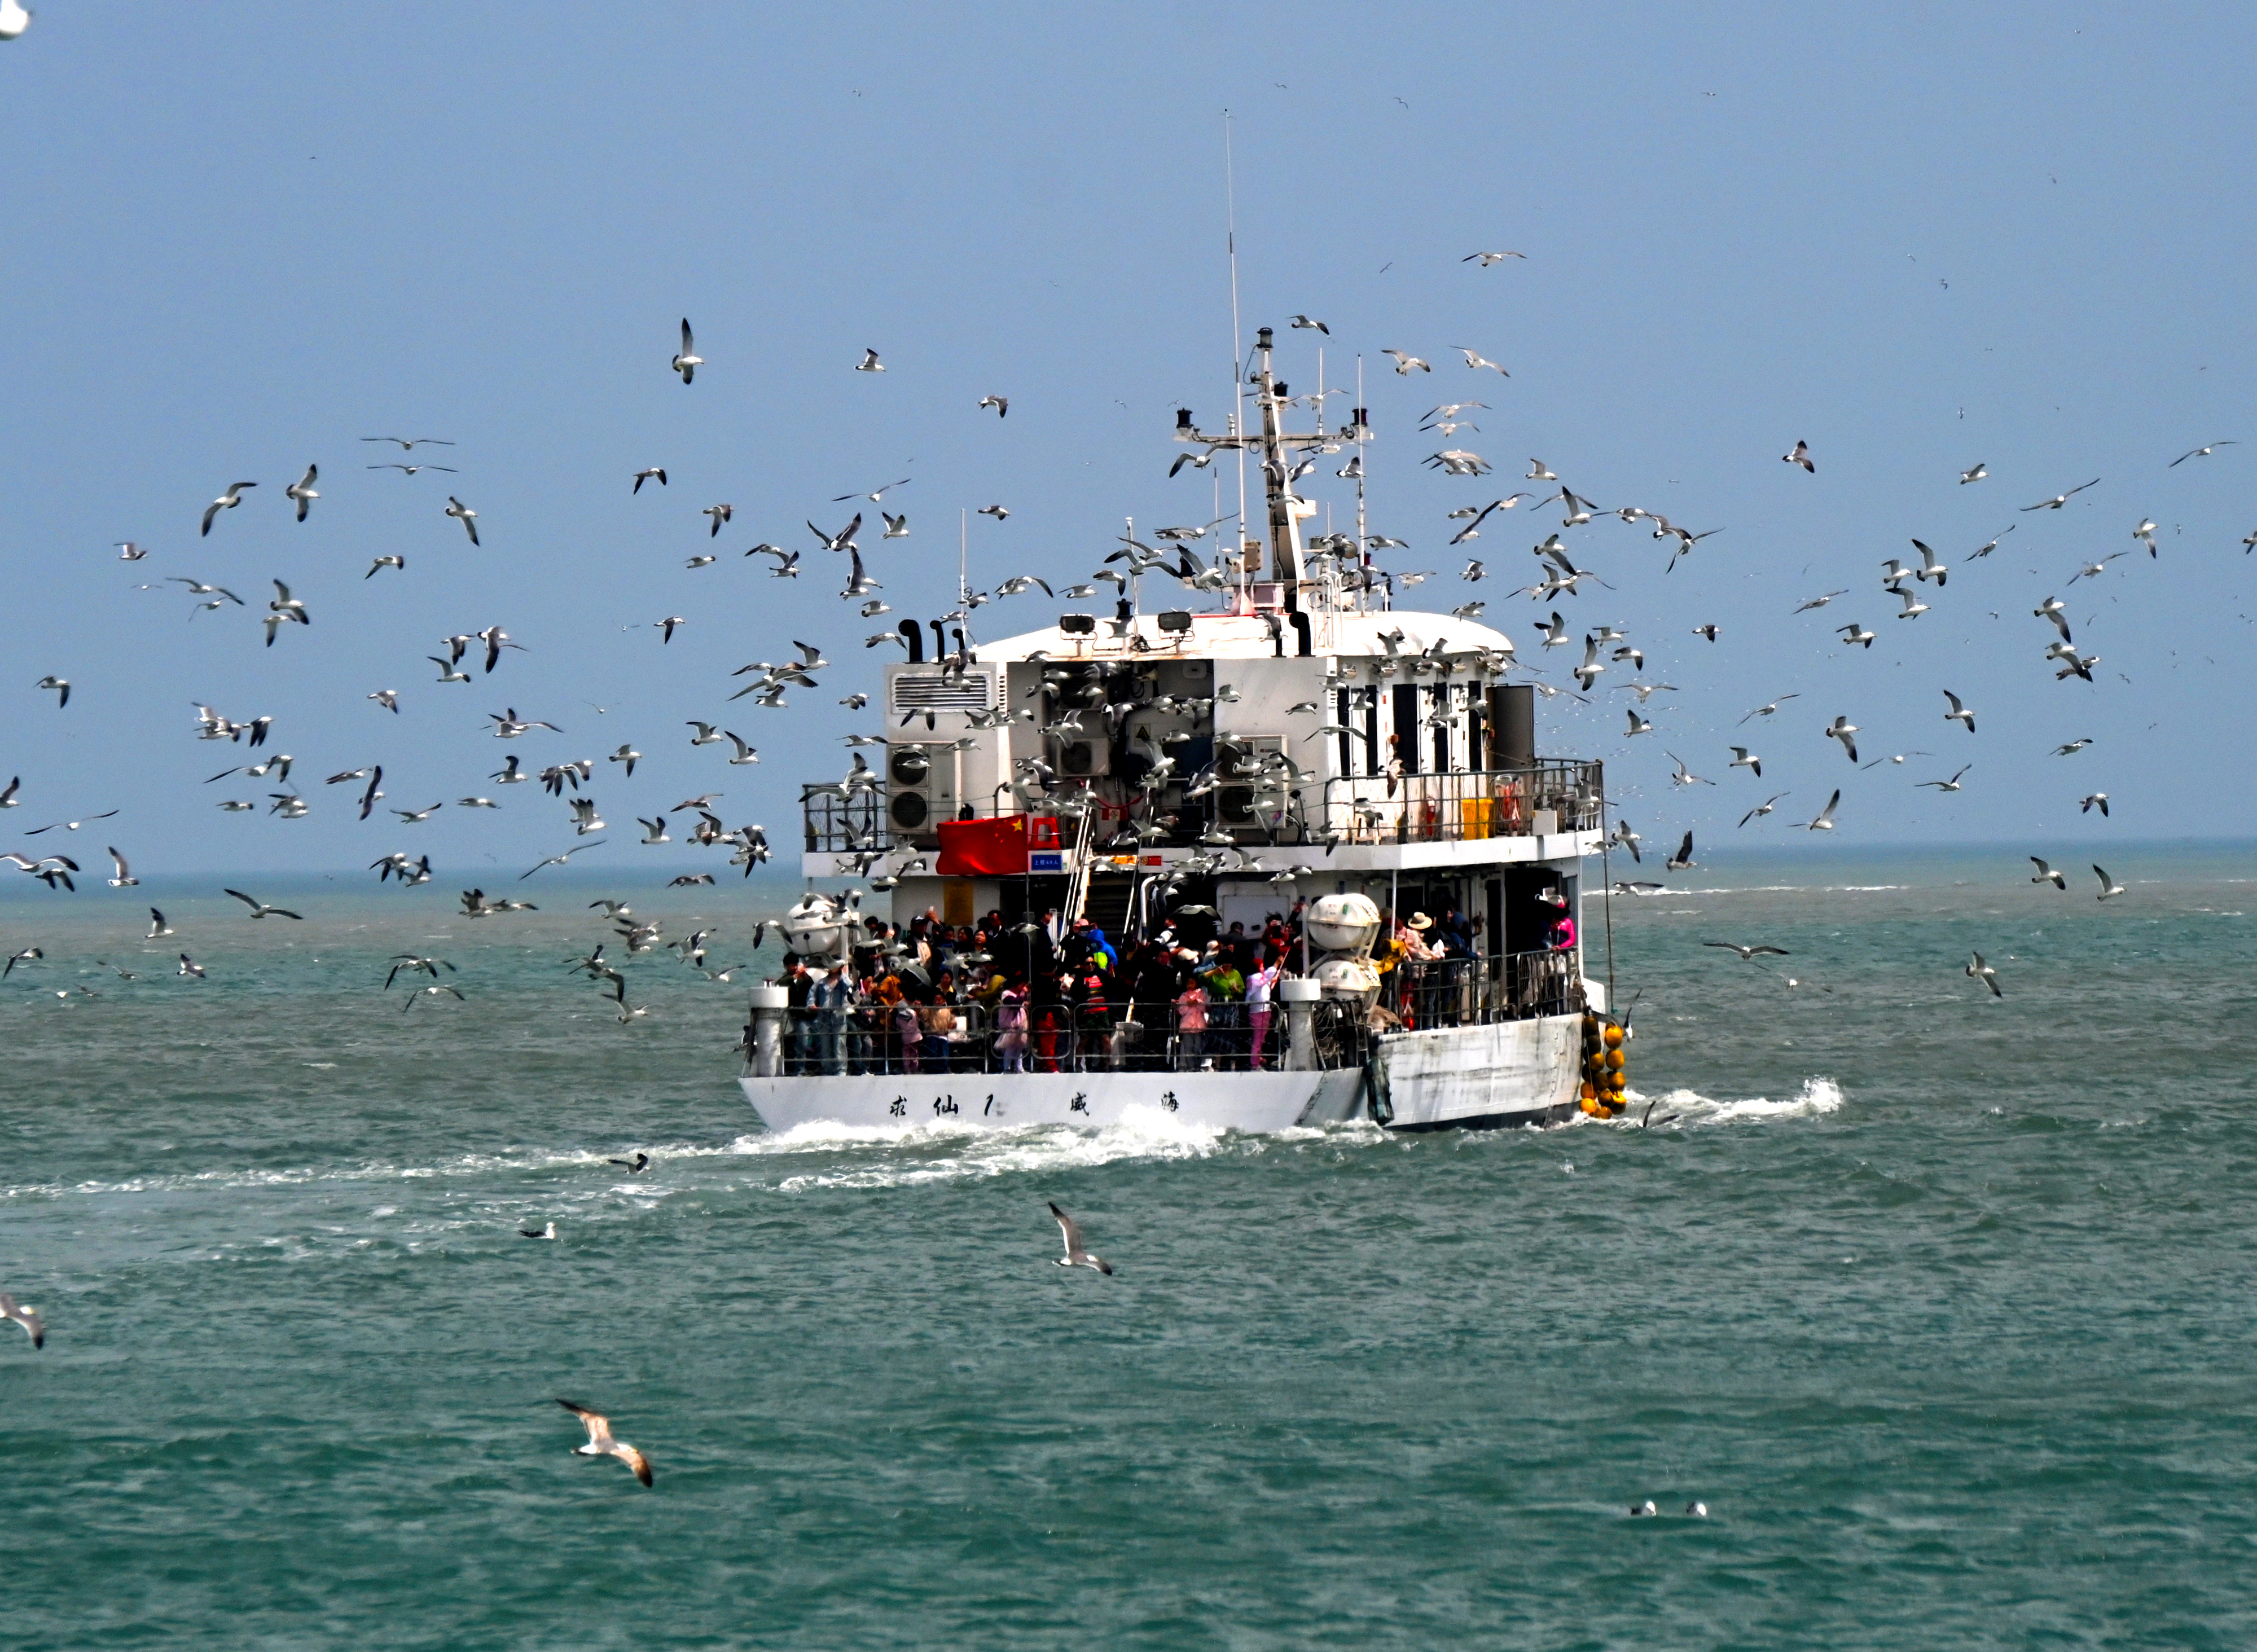 Flocks of black-tailed gulls go along for the ride as tourists enjoy a boat trip around Hailyu Island in Weihai, Shandong on May 3, 2023. /CFP 